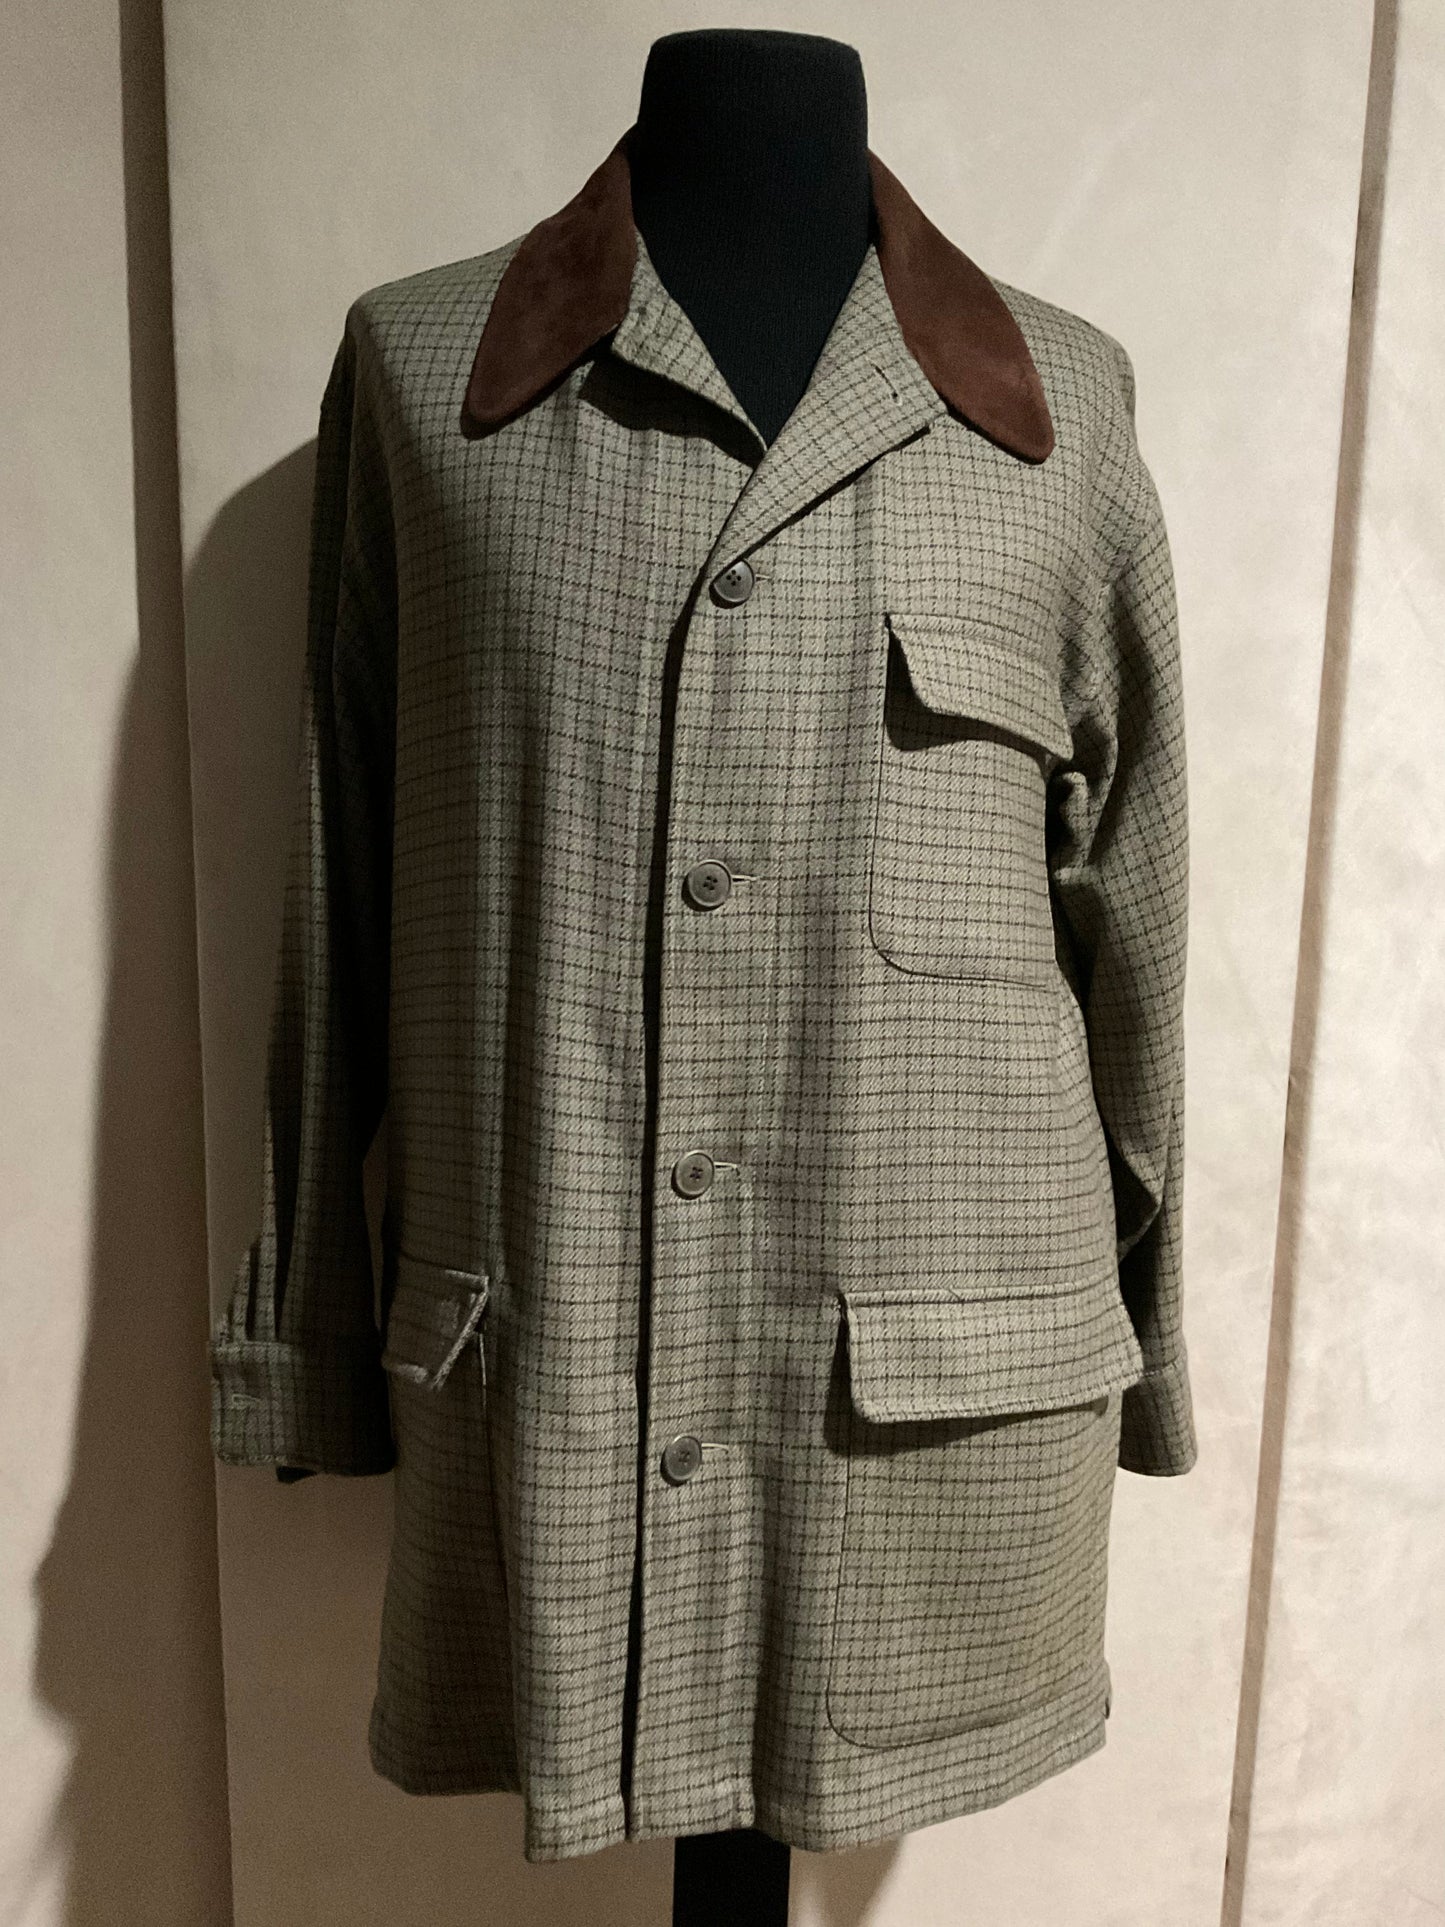 R P ENGLISH COUNTRY JACKET / OLIVE CHECK / BROWN SUEDE / MEDIUM - LARGE / MADE IN USA